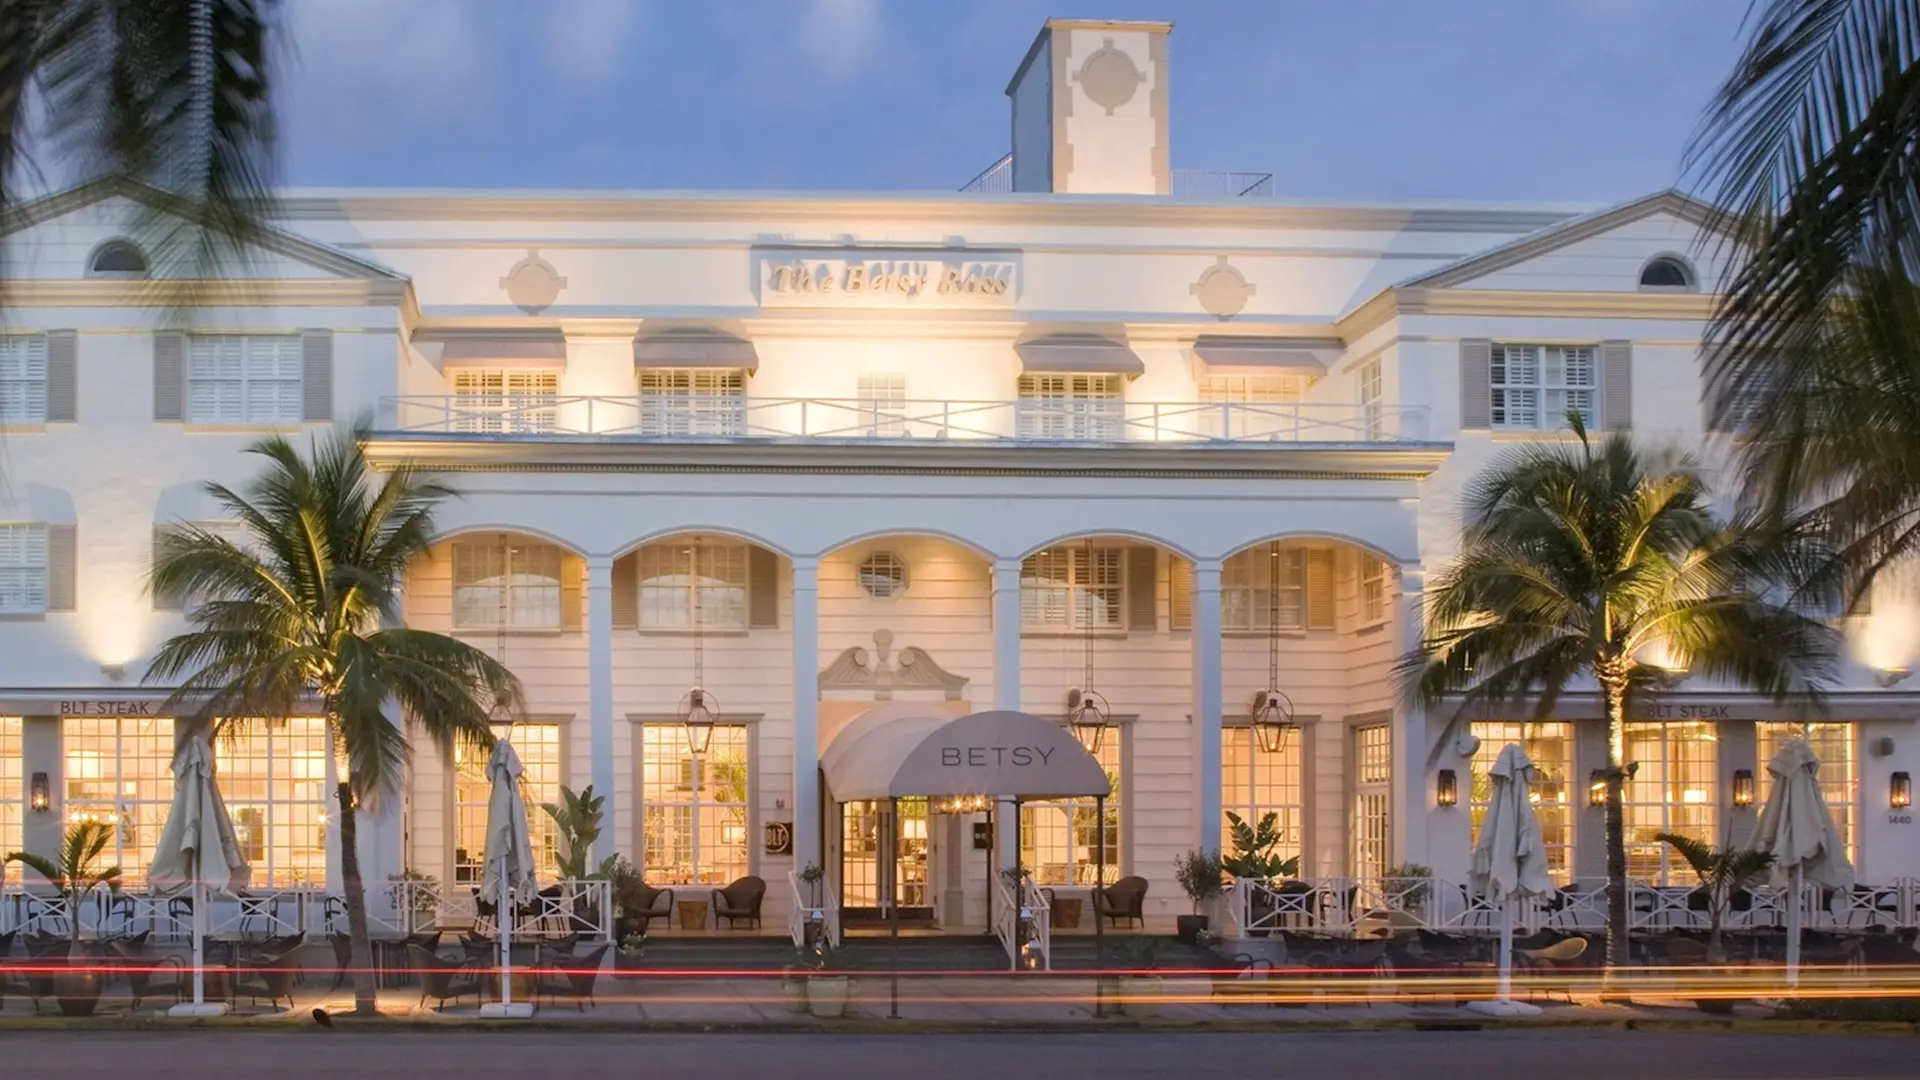 Hotel review Location' - The Betsy Hotel, South Beach - 3